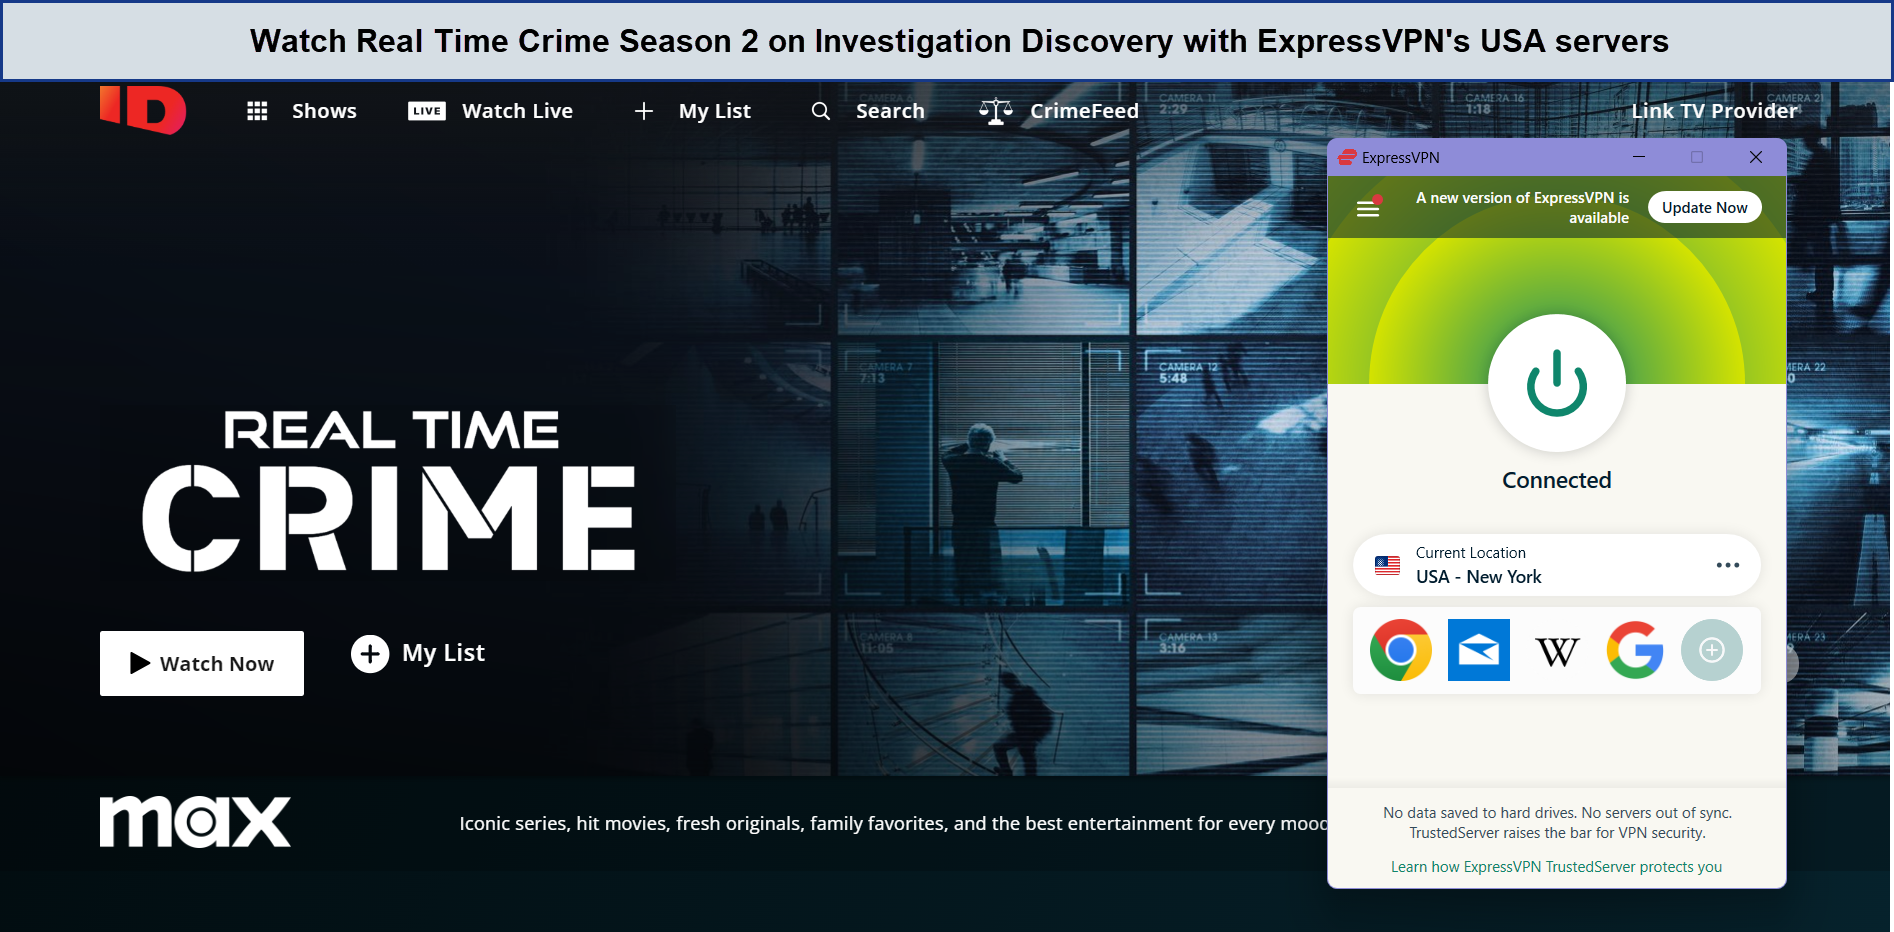 Watch-Real-Time-Crime-on-Investigation-Discovery-with-ExpressVPN-in-UK